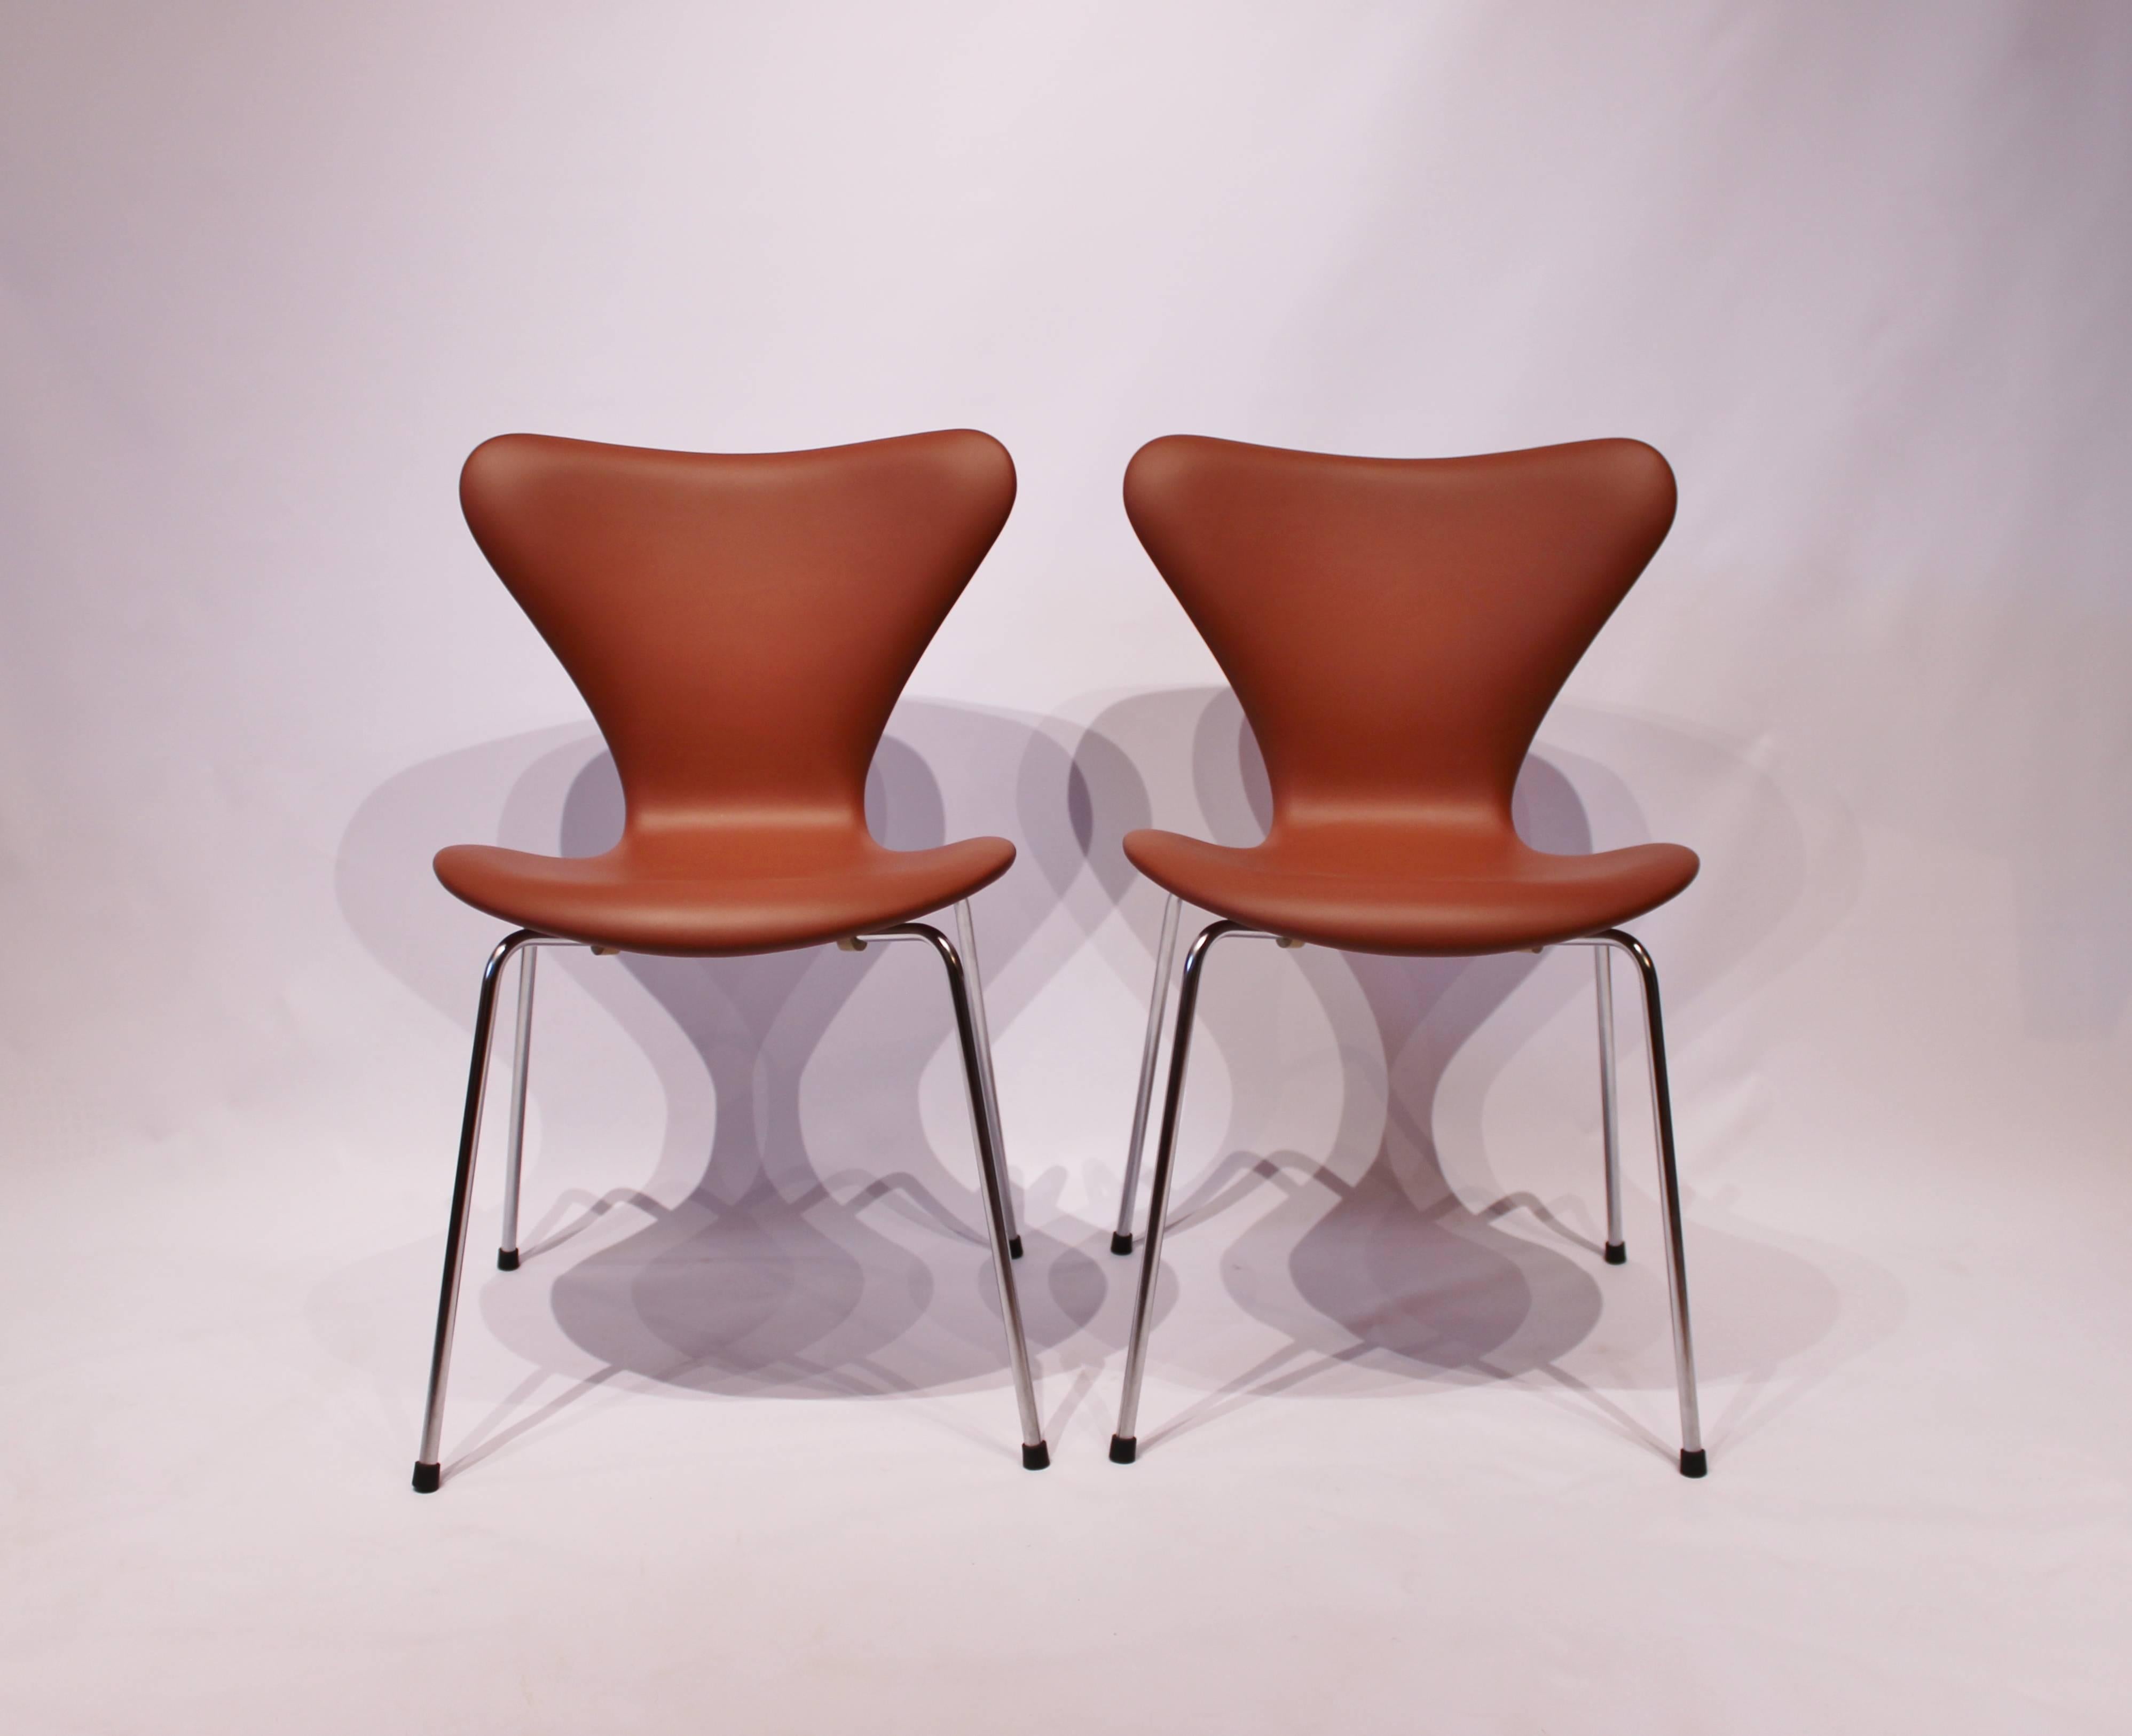 A pair of seven chairs, model 3107, designed by Arne Jacobsen and manufactured by Fritz Hansen, and recently upholstered in cognac-colored Savanne leather, is an exquisite and luxurious addition to any interior space.

As mentioned before, Arne